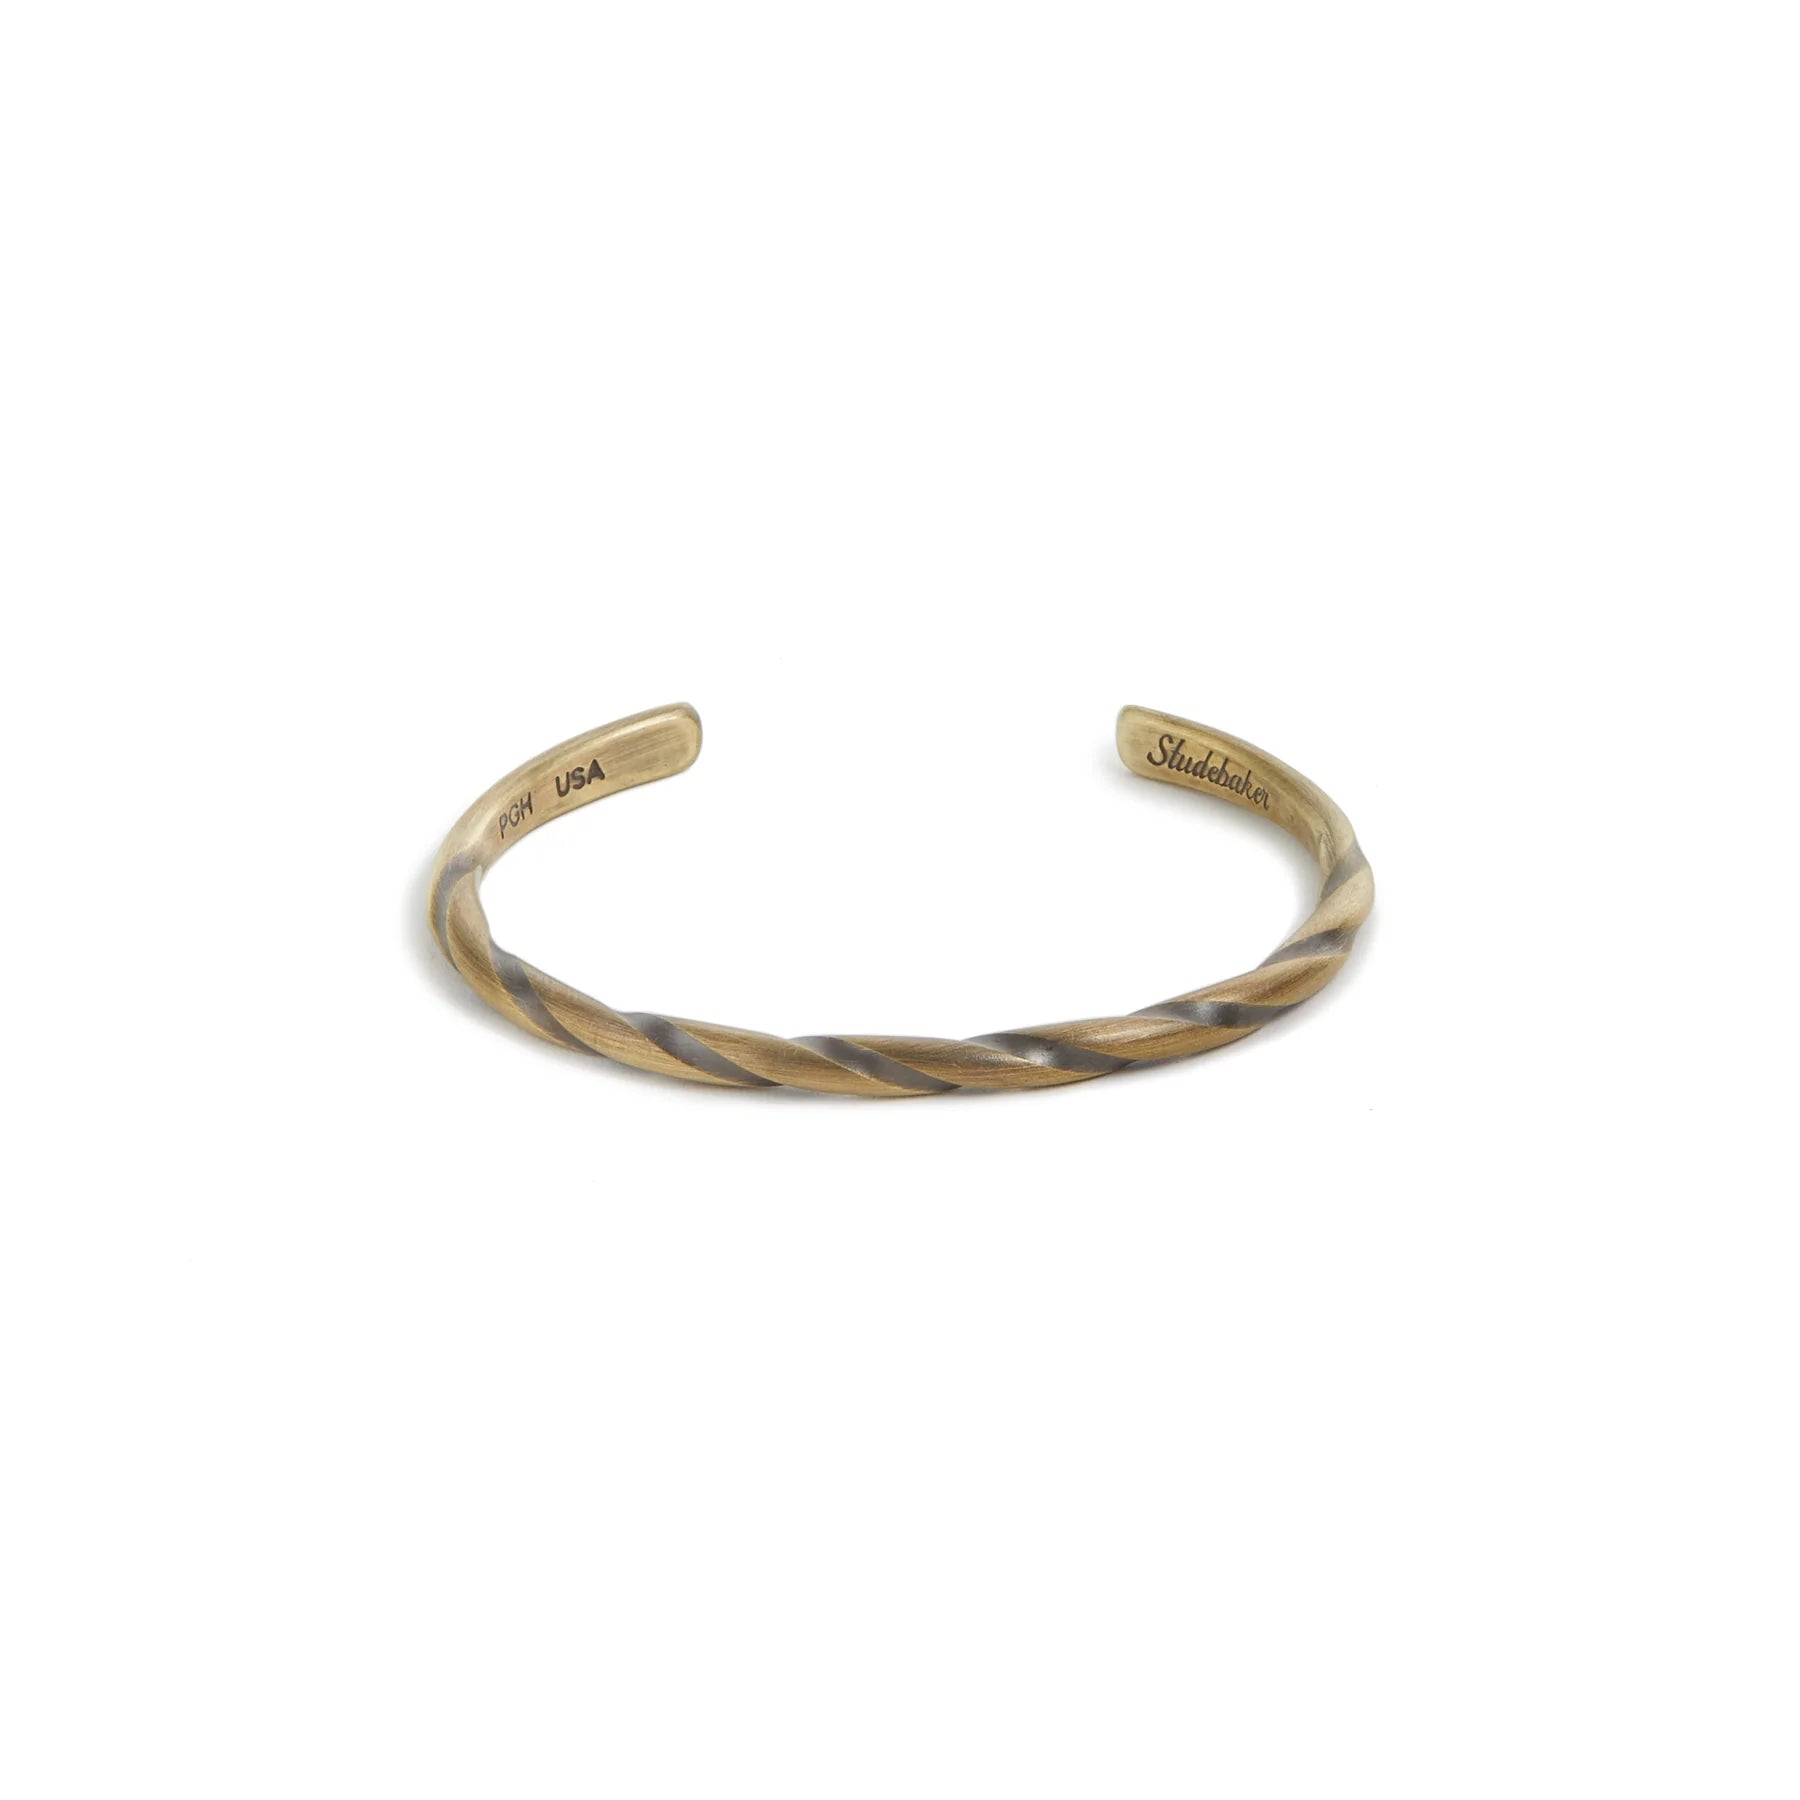 Studebaker - Rotary Cuff - Large-Men's Accessories-Brass-Yaletown-Vancouver-Surrey-Canada